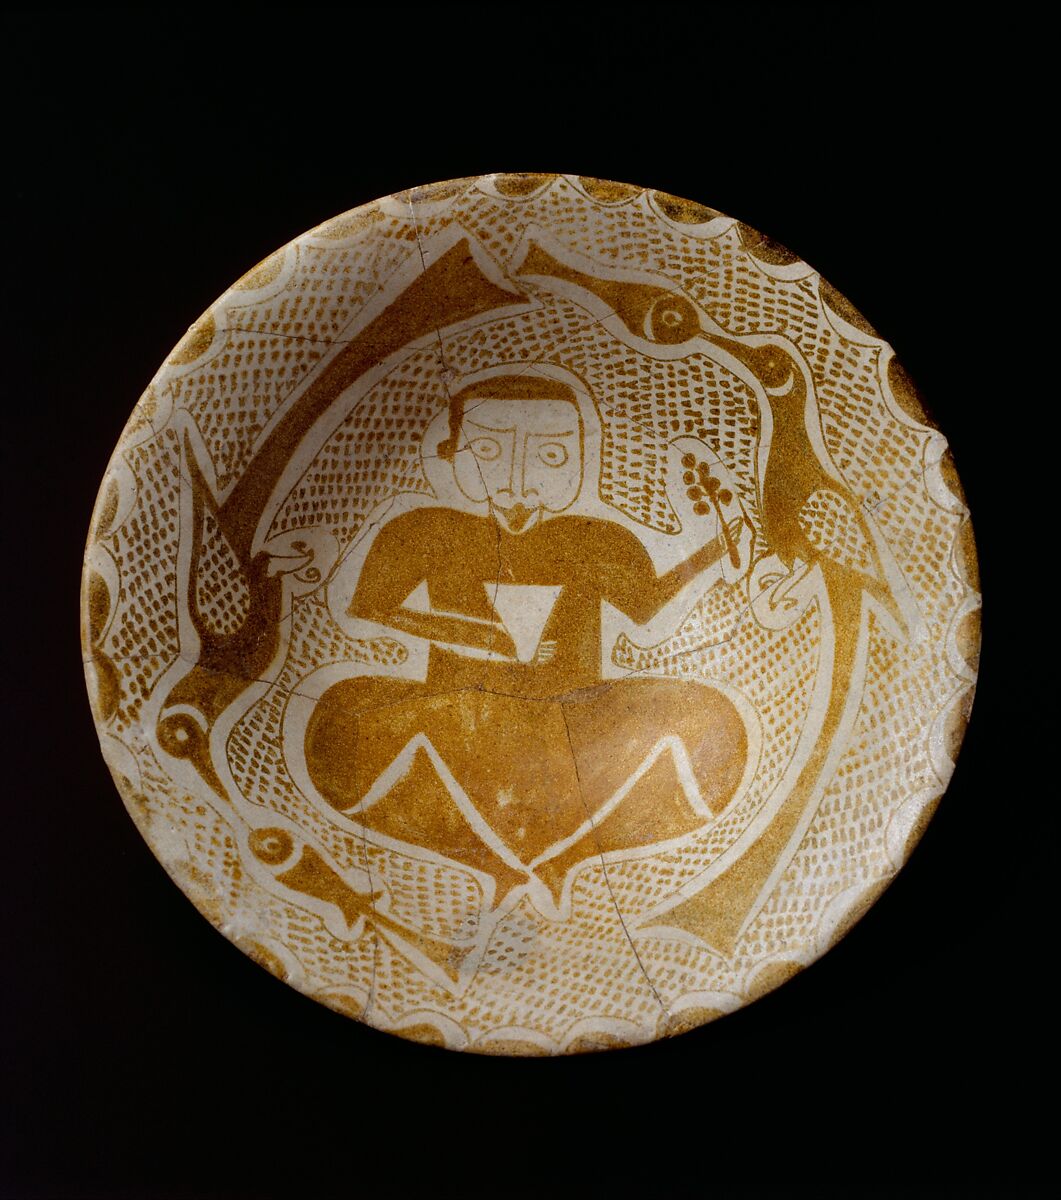 Bowl depicting a Man holding a Cup and a Flowering Branch, Earthenware; luster-painted on opaque white glaze 